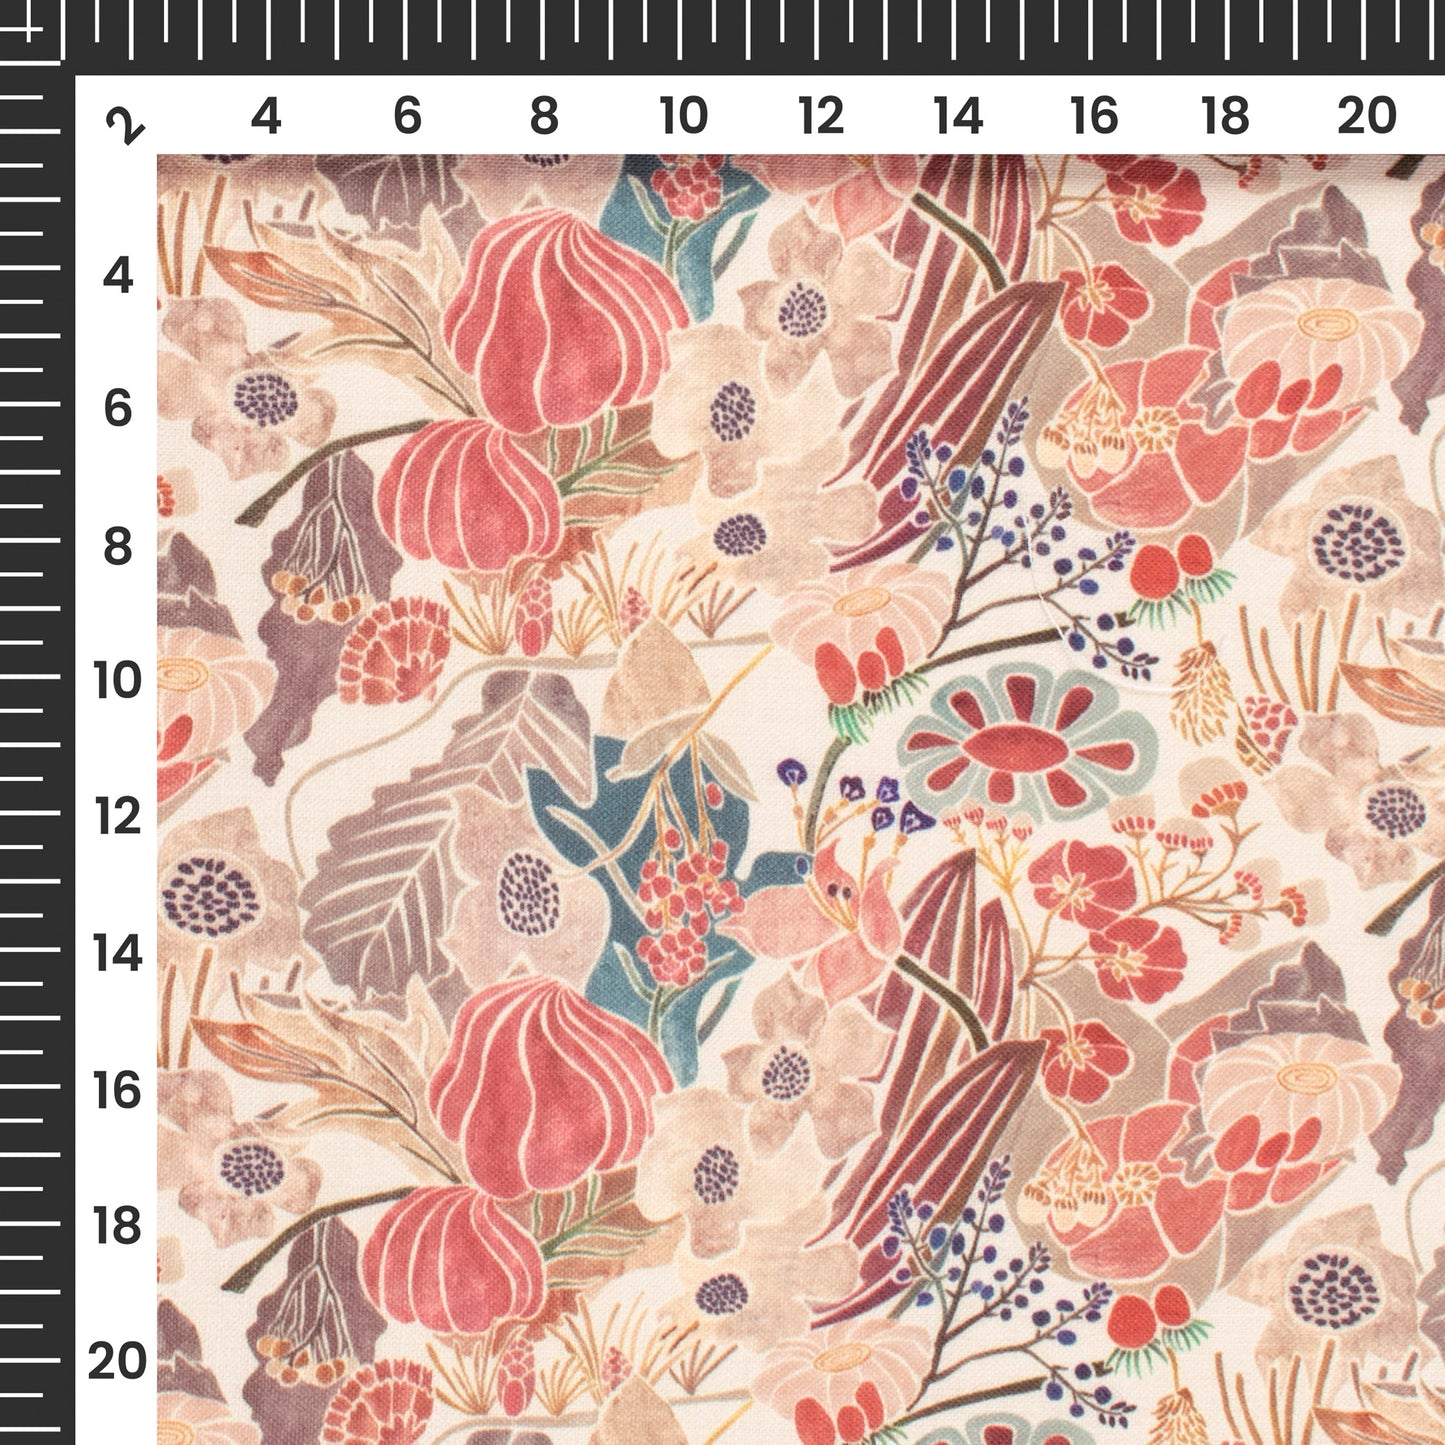 Burnt Umber Floral Digital Print Linen Textured Fabric (Width 56 Inches)